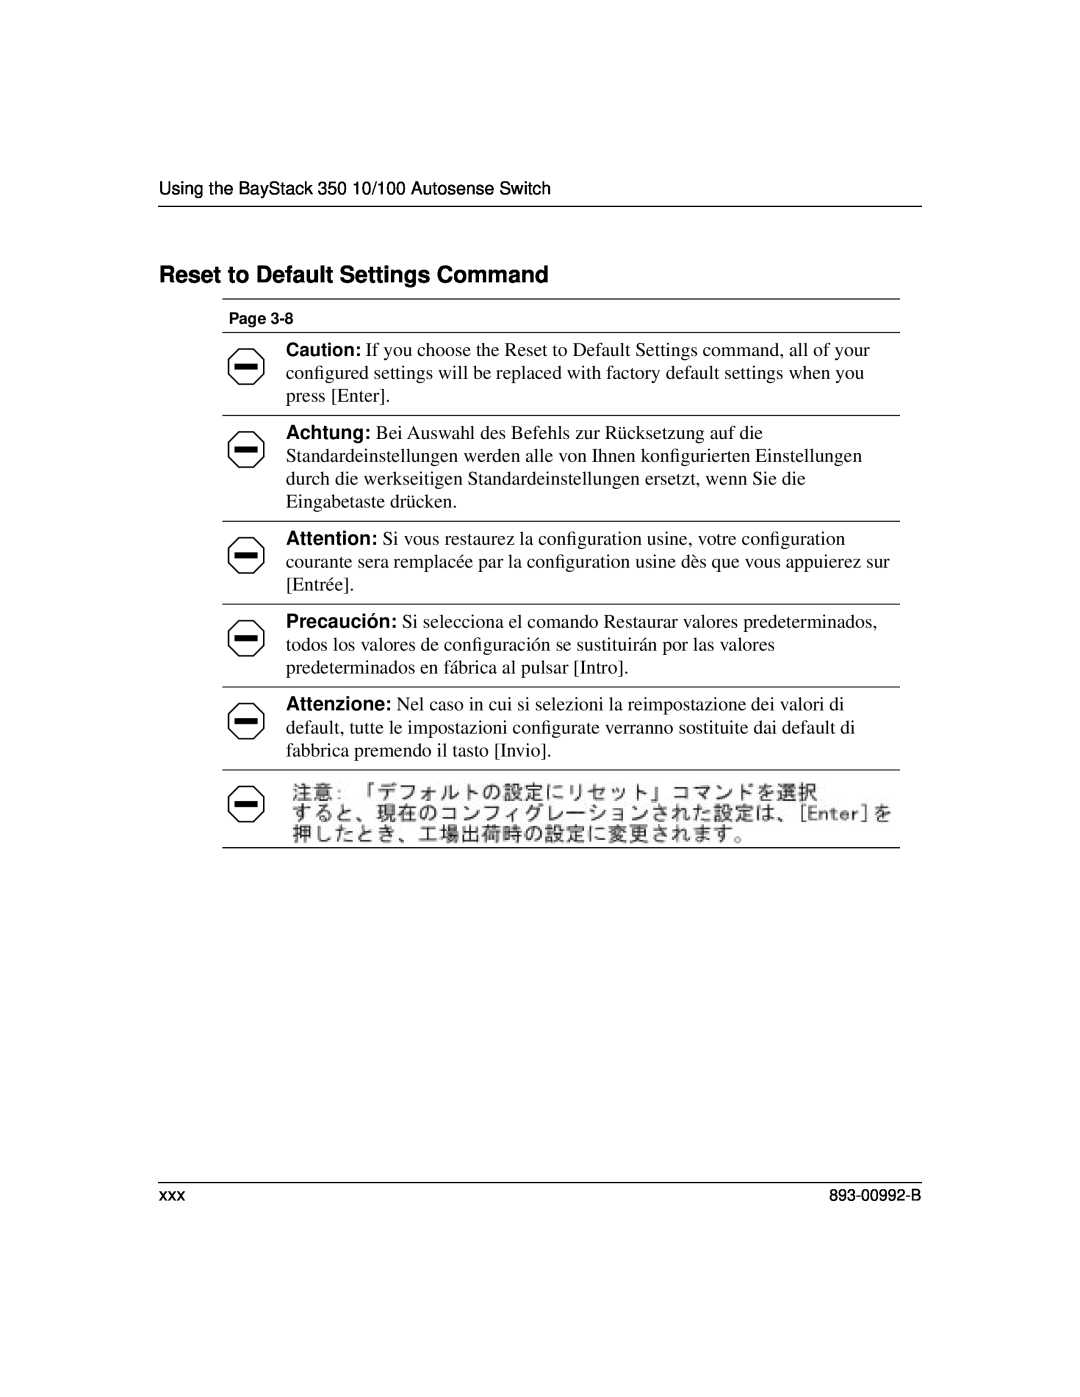 Bay Technical Associates 350 manual Reset to Default Settings Command 